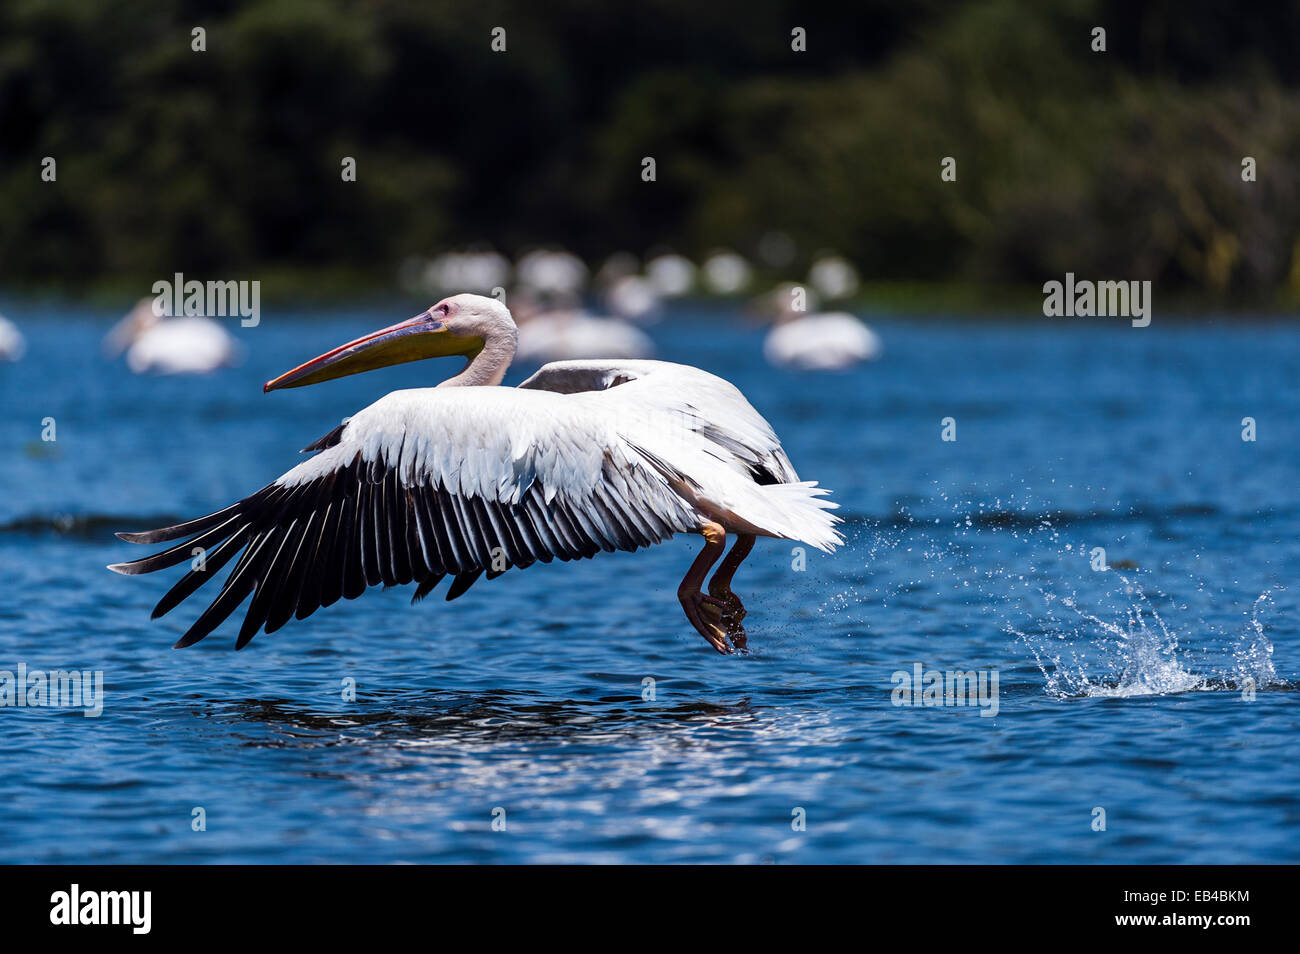 A great white pelican taking flight from the surface of a flooded freshwater lake. Stock Photo